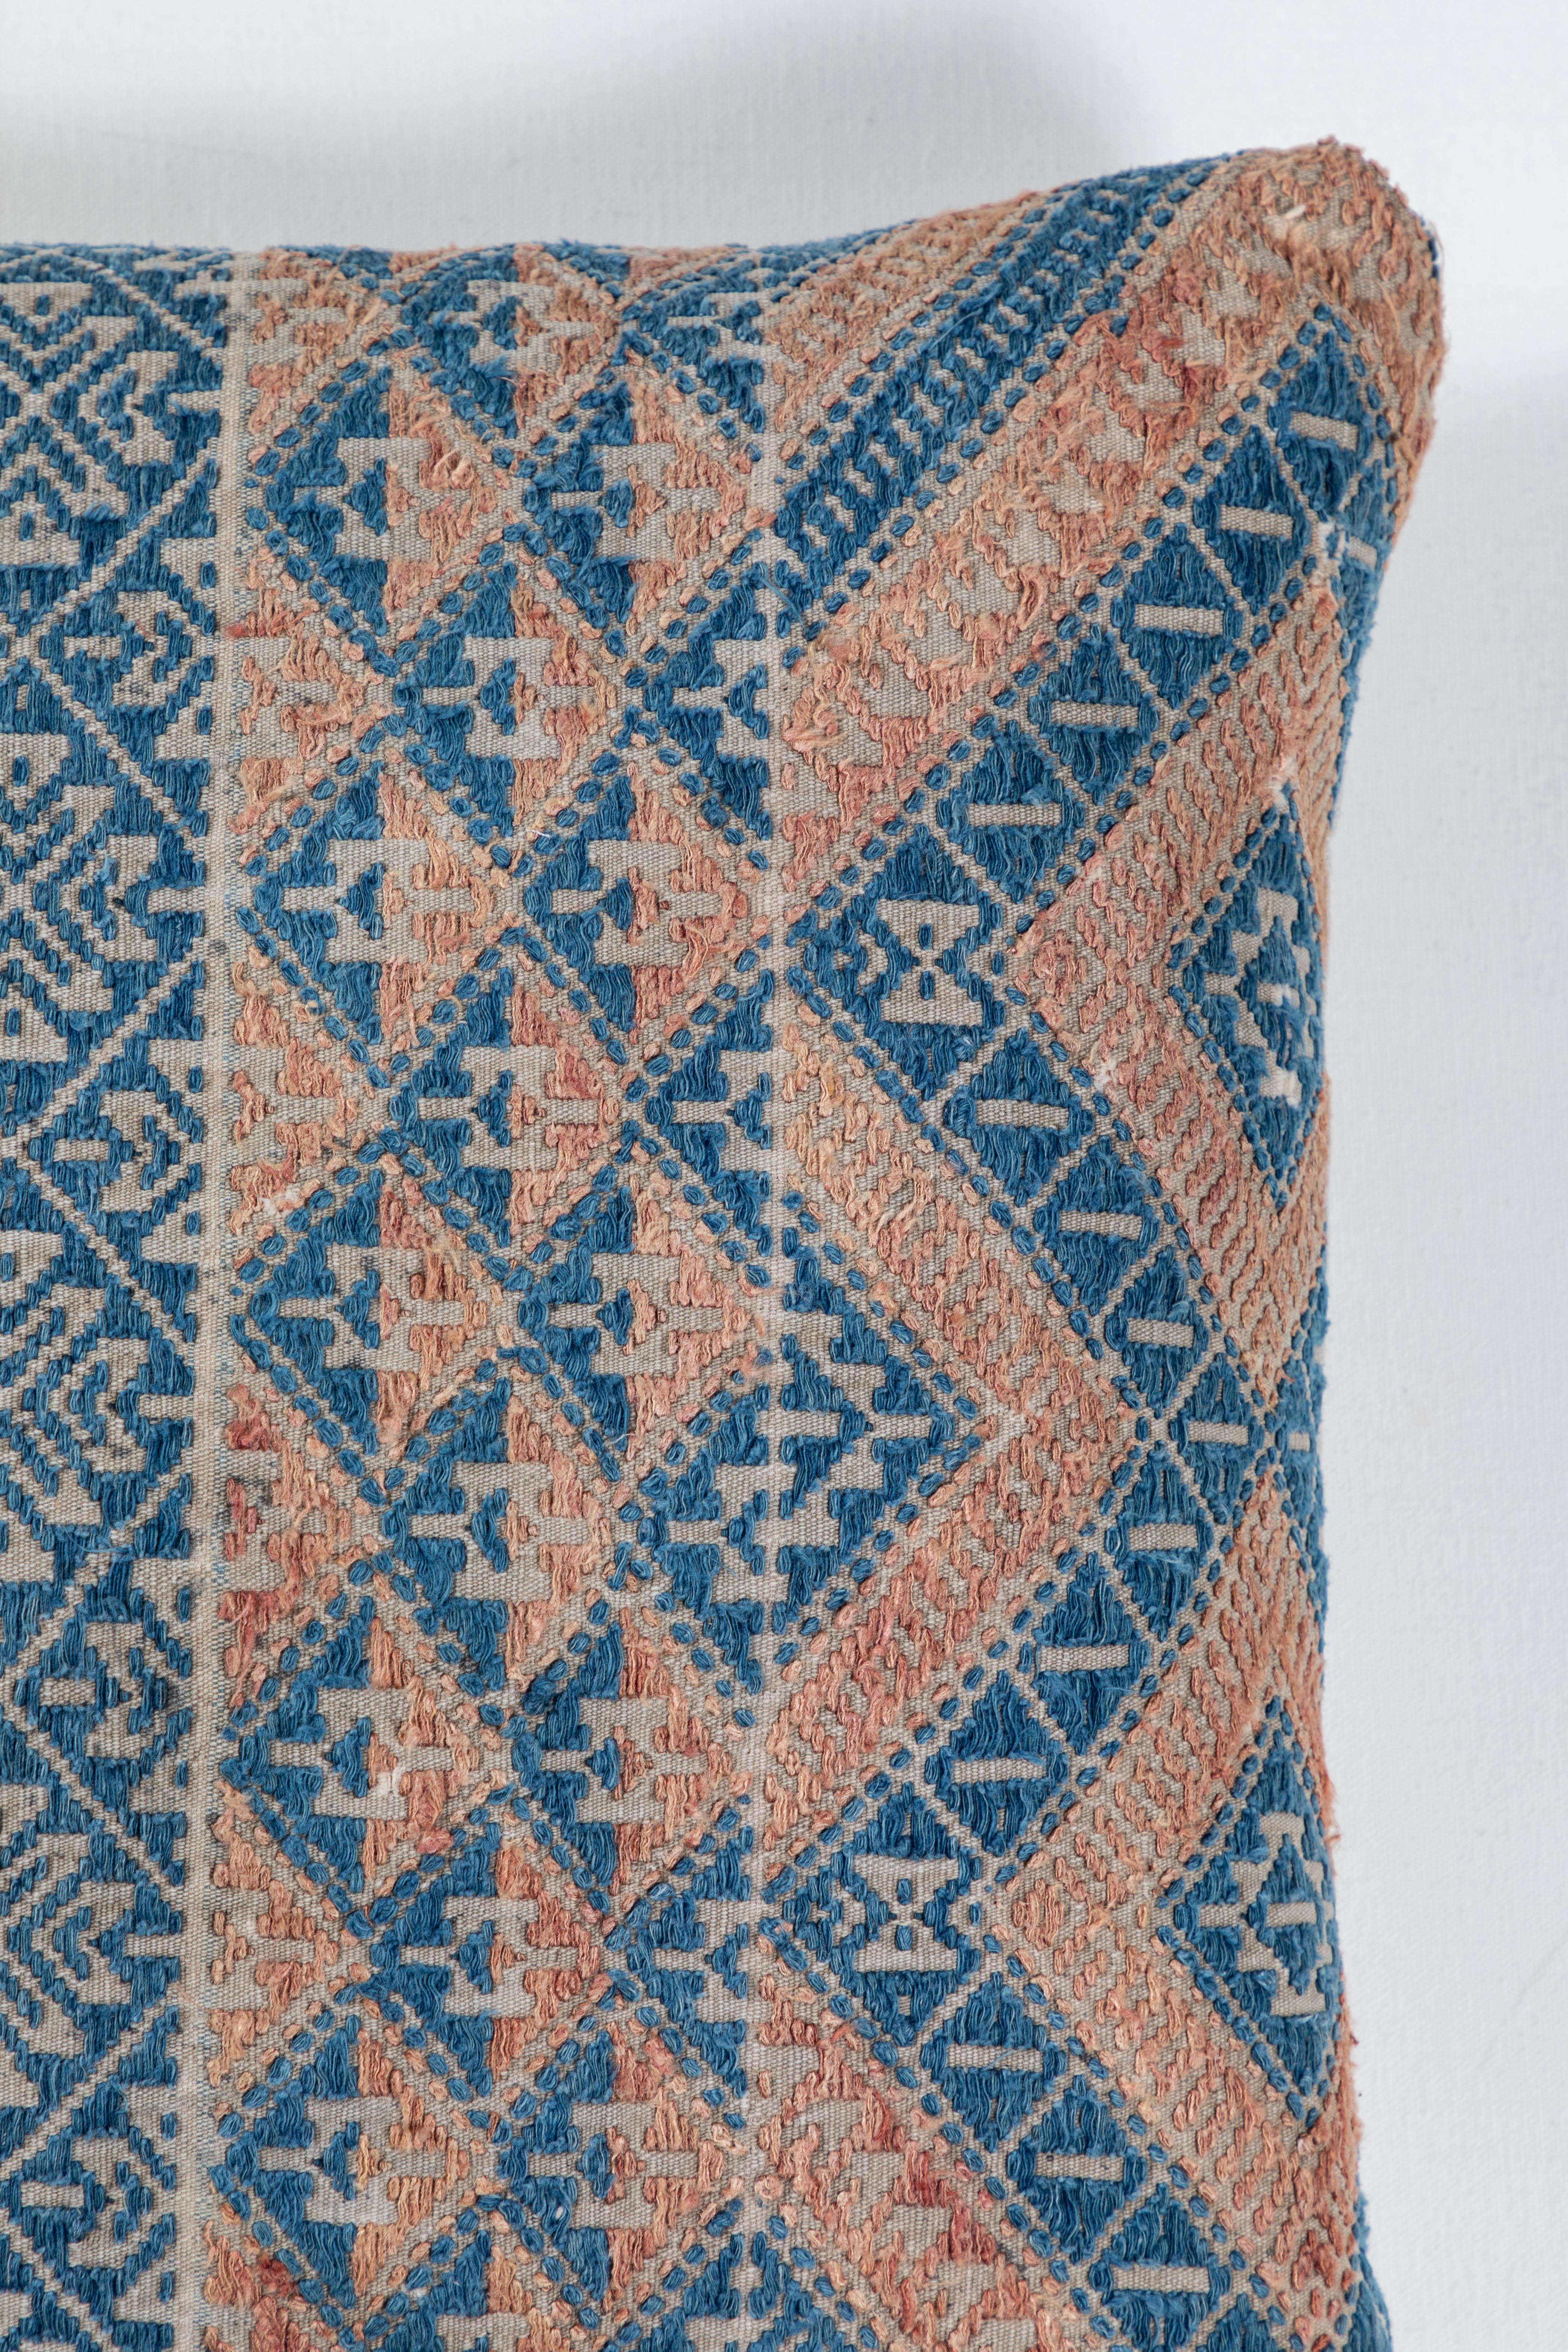 Hand-loomed cotton brocade “marriage quilt” Hmong tribal textile. Backed with natural linen, feather and down fill, invisible zipper.


 